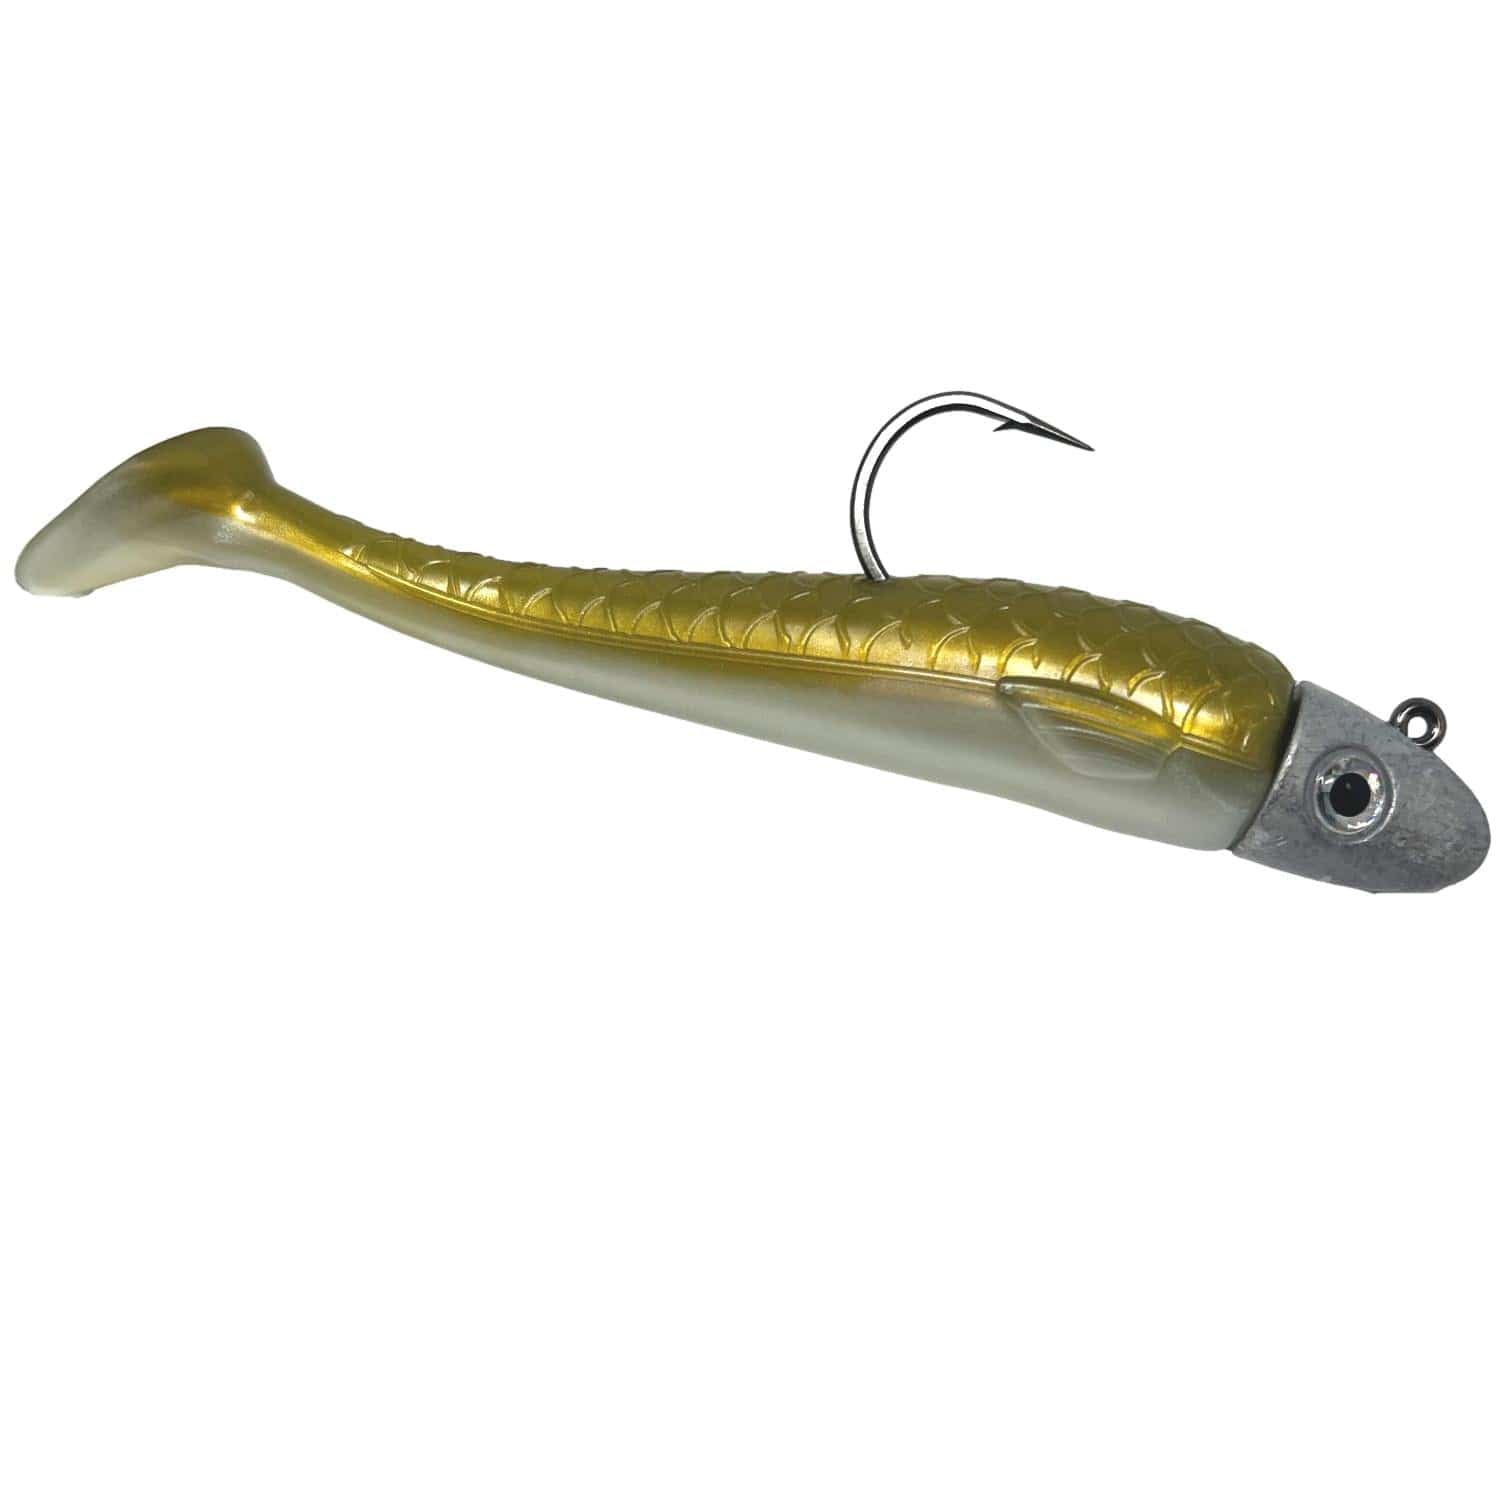 RonZ Z-Fin Original Series Rigged Sand Eel (5 and 6) - The Saltwater Edge